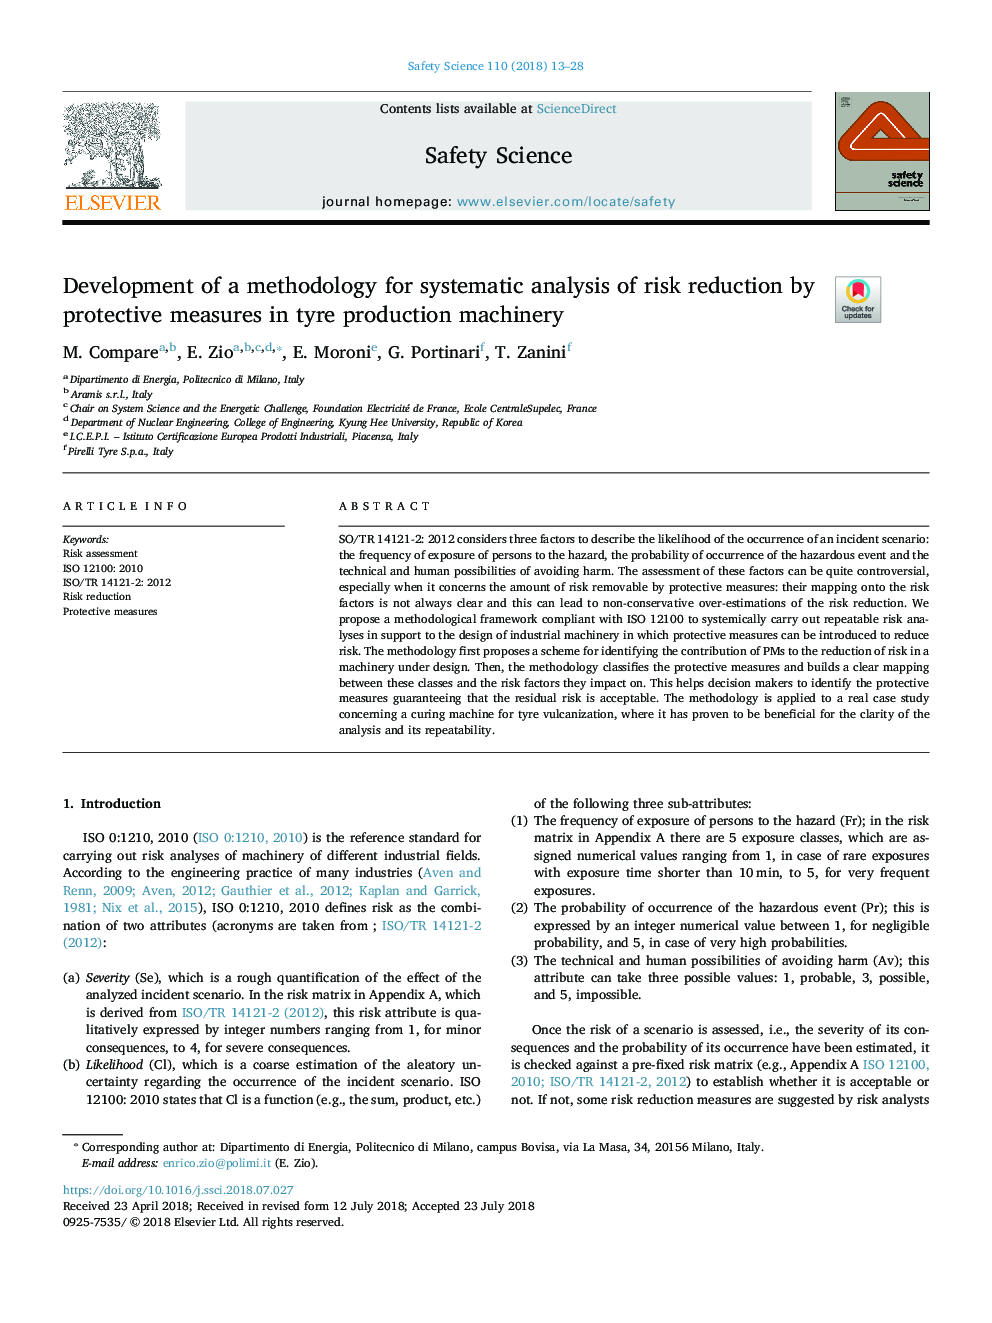 Development of a methodology for systematic analysis of risk reduction by protective measures in tyre production machinery